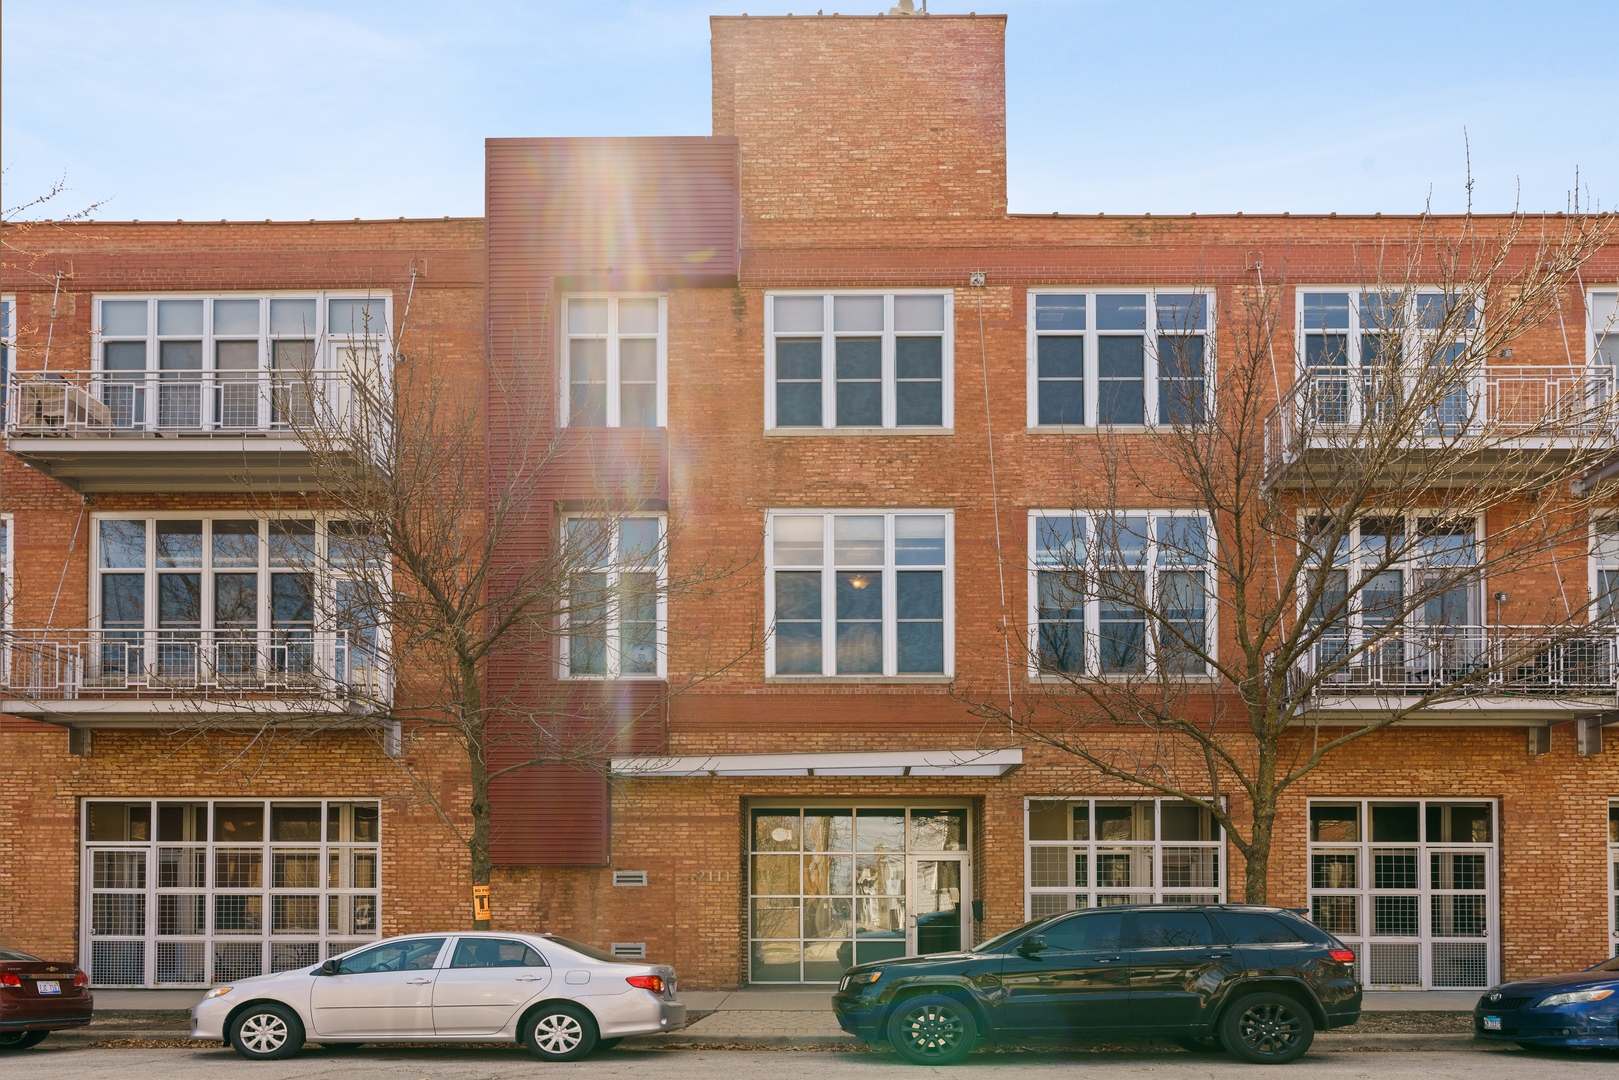 Sold: 2111 W Churchill Street, #101, Chicago, IL 60647 | 1 Bed / 1 Full ...